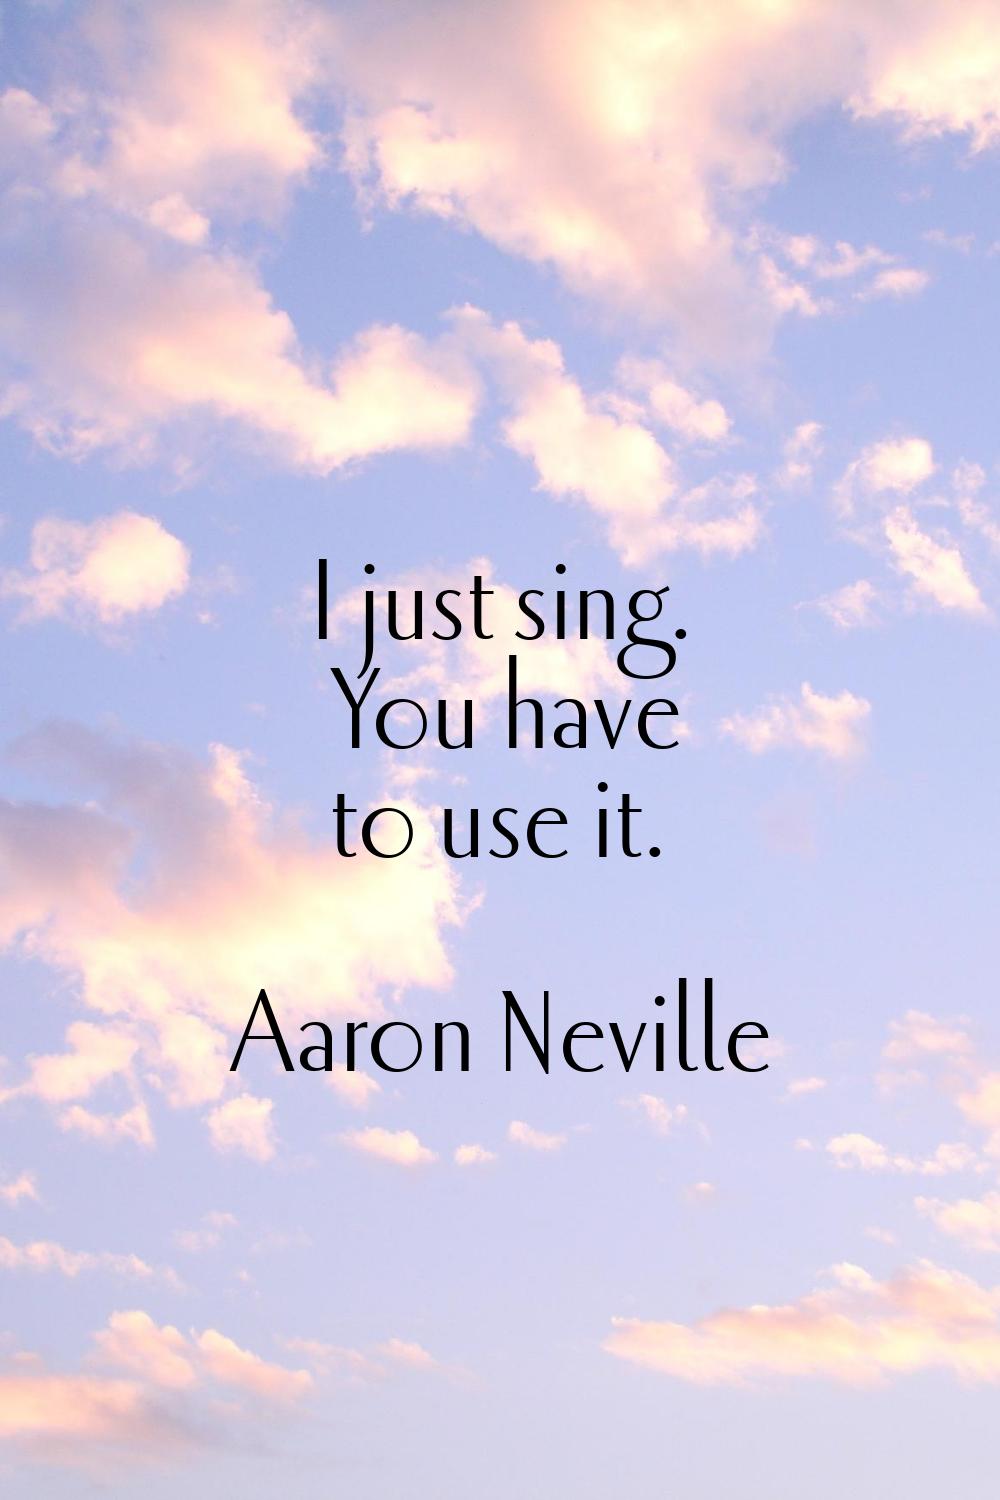 I just sing. You have to use it.